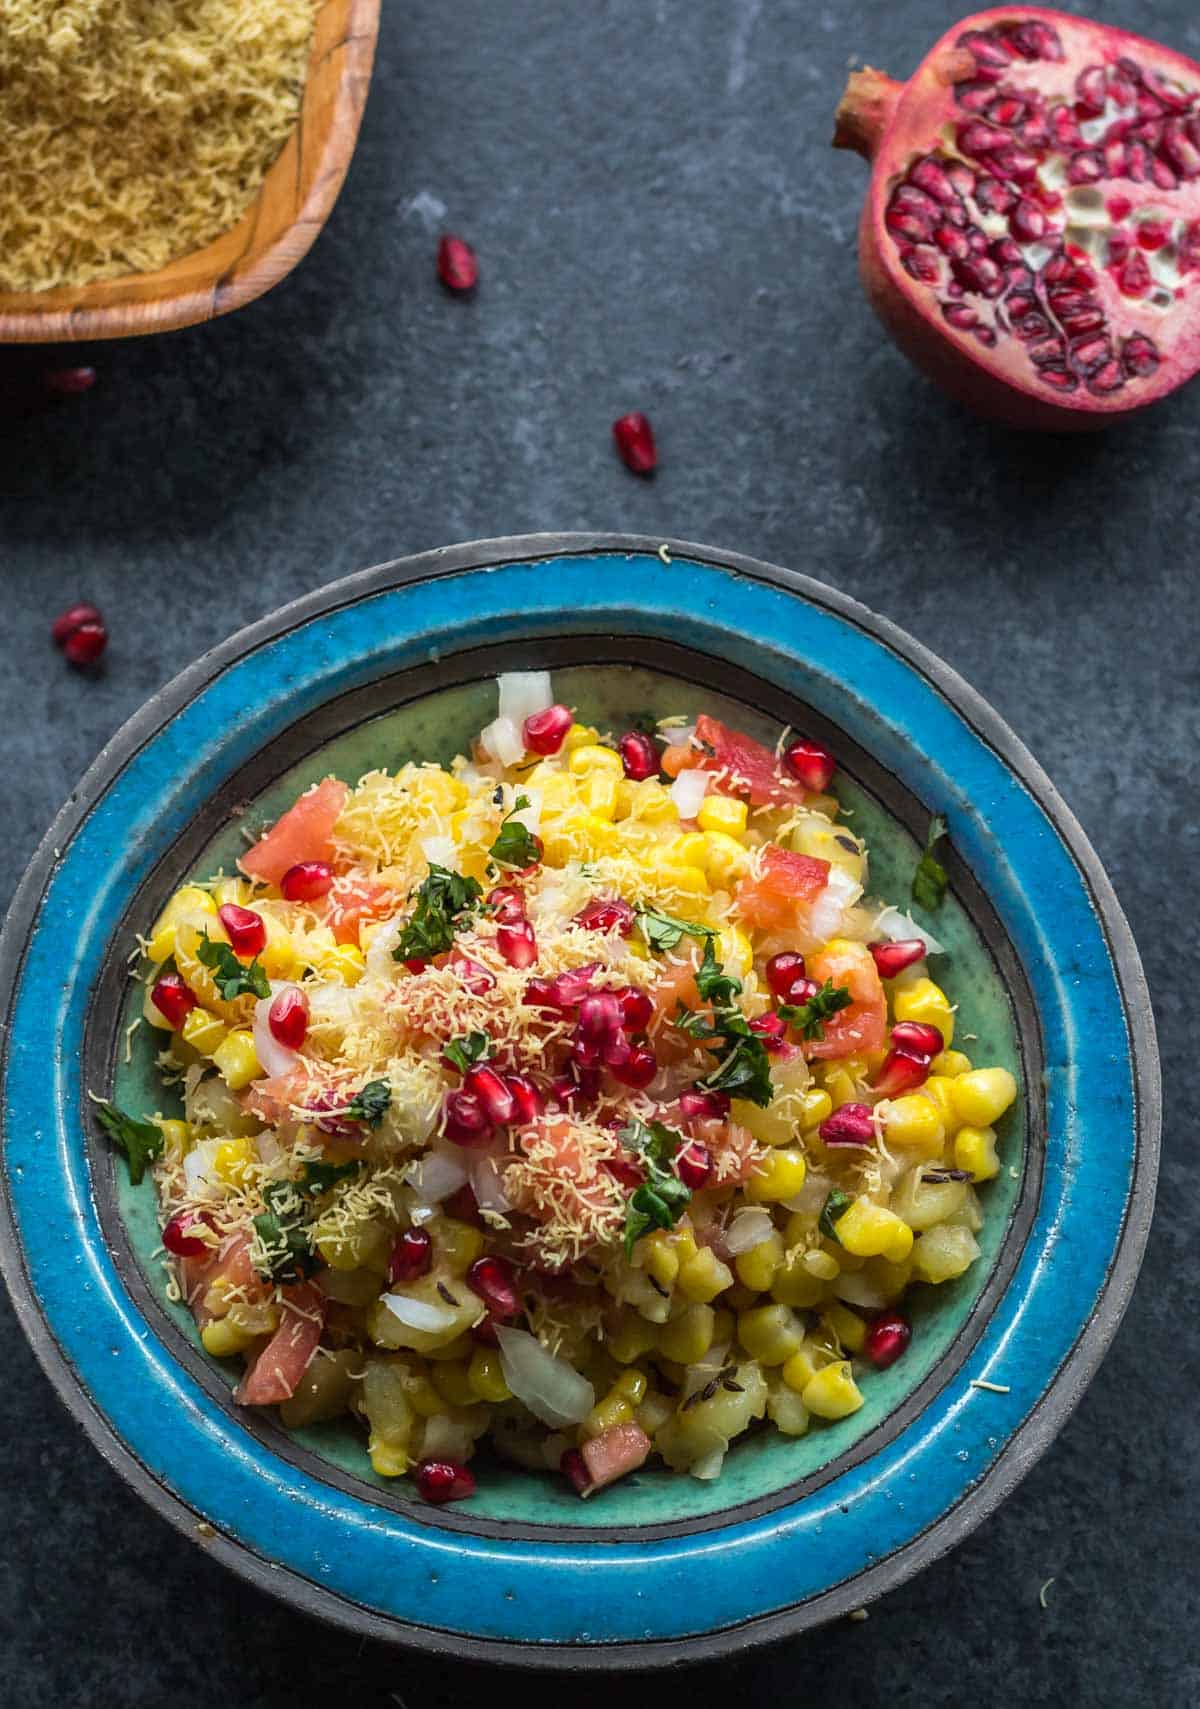 Try this non-traditional way of making corn bhel or corn chaat* and you'll be hooked. While most Indian street food demands a mandatory drizzling of tamarind chutney and green chutney, this no-fuss corn bhel recipe doesn't require either. Since corn bhel is best served at room temperature, it is perfect for not just as snacks but for school lunches too!